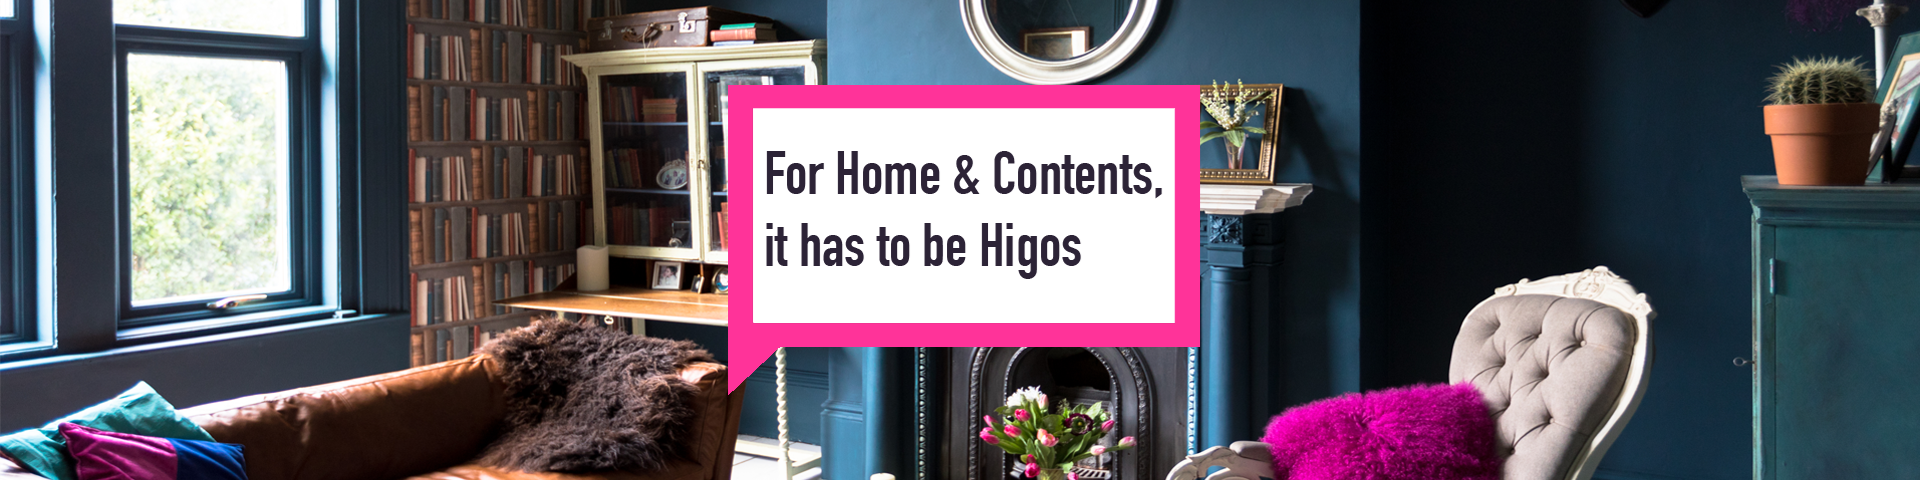 Higos Personal insurance home and contents